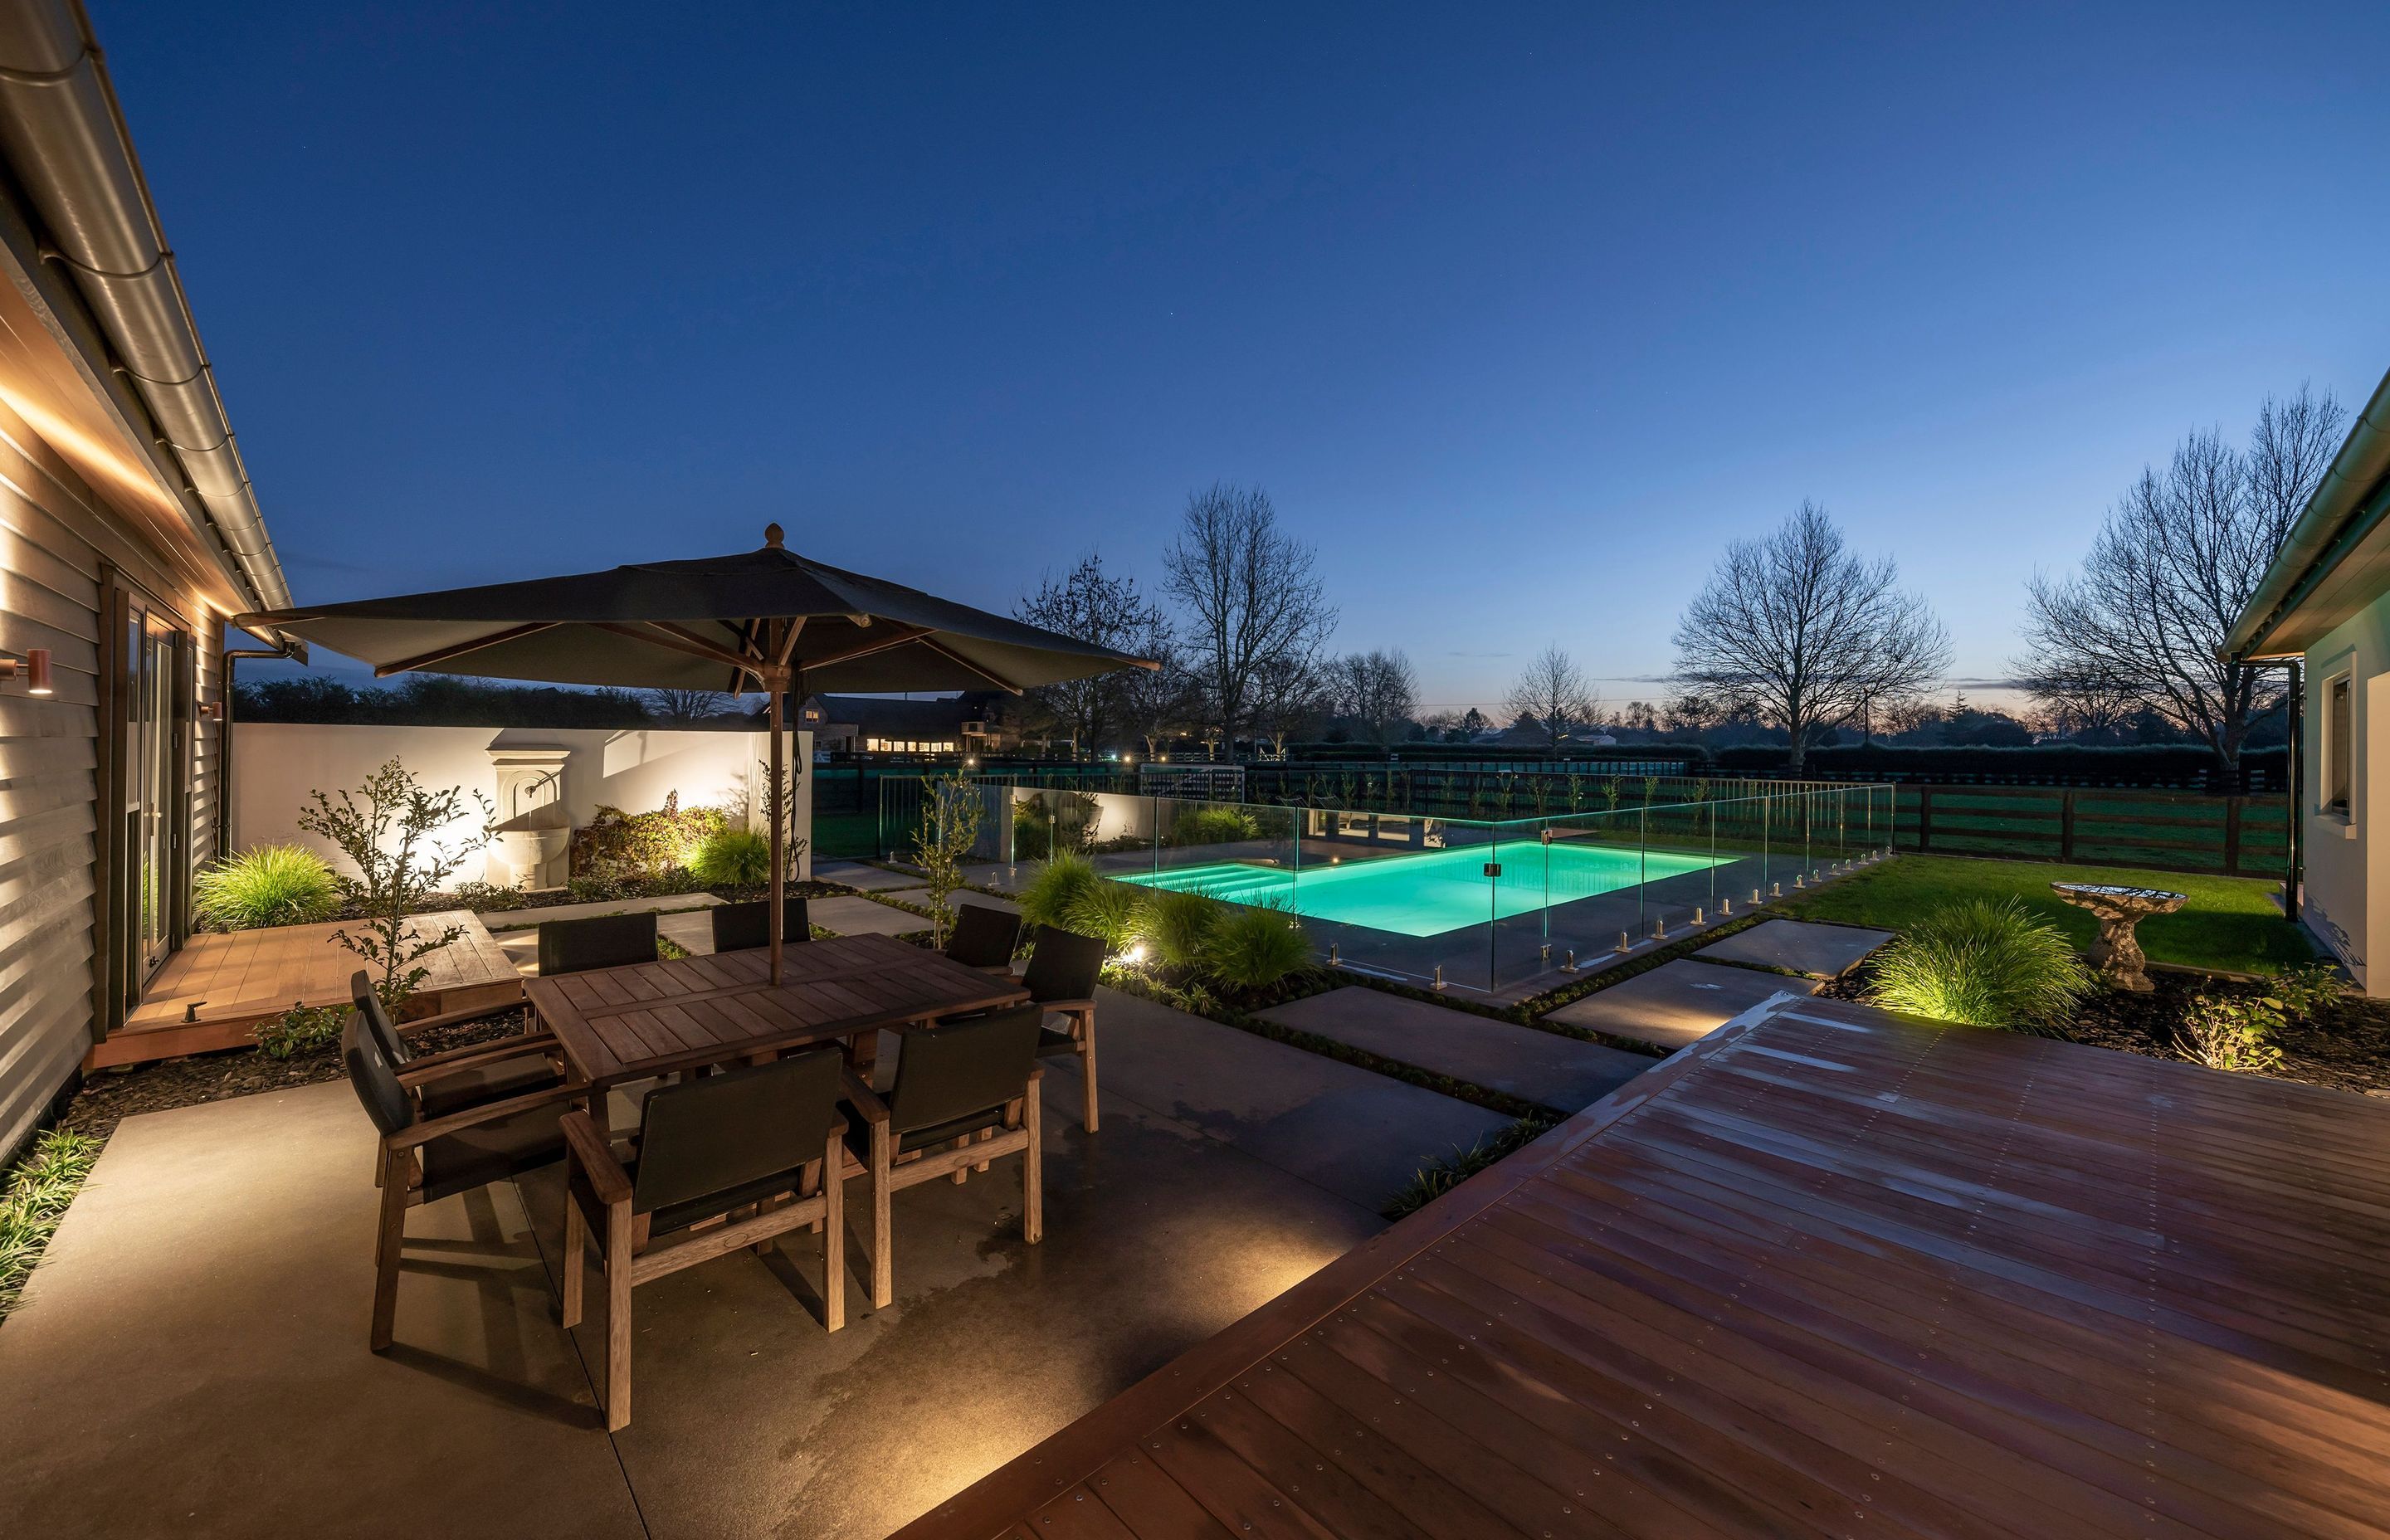 Outdoor entertaining is a cinch, with multiple egress points leading onto decks and terraces, as well as the pool.